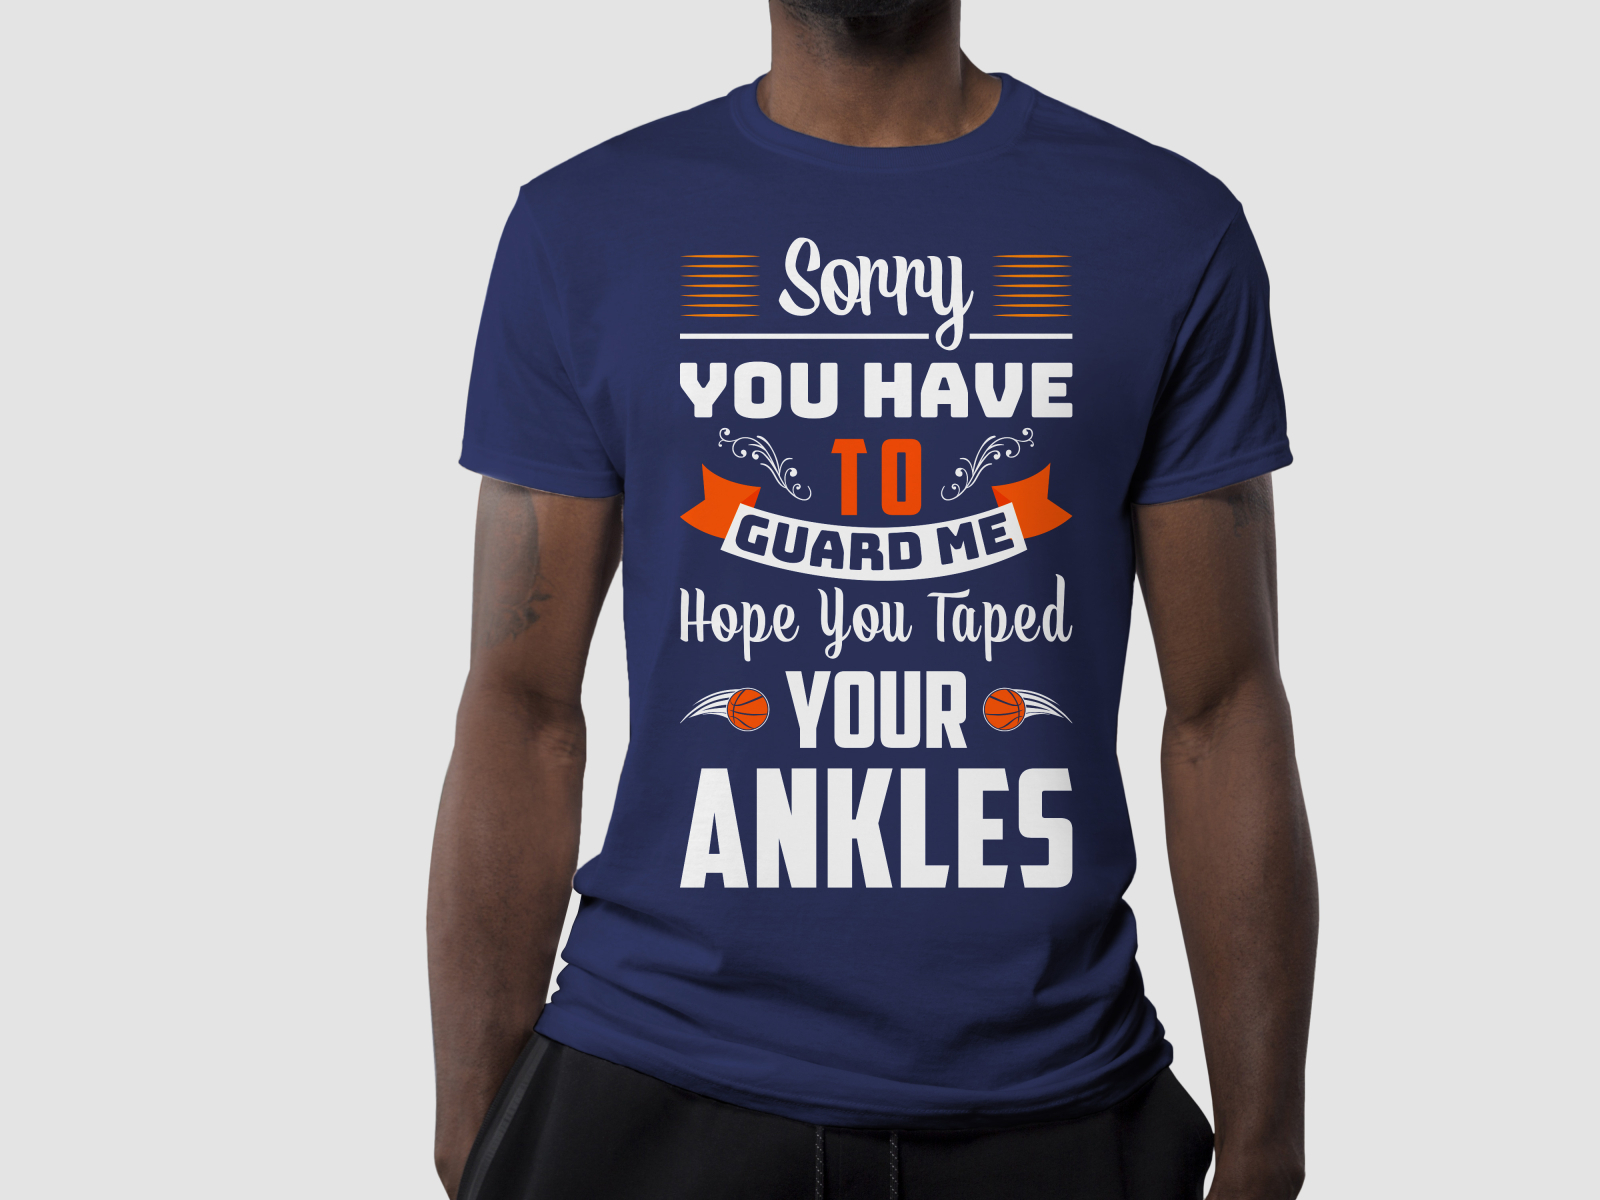 Sorry You Have To Guard Me Custom T shirt Design by Masud Rana on Dribbble